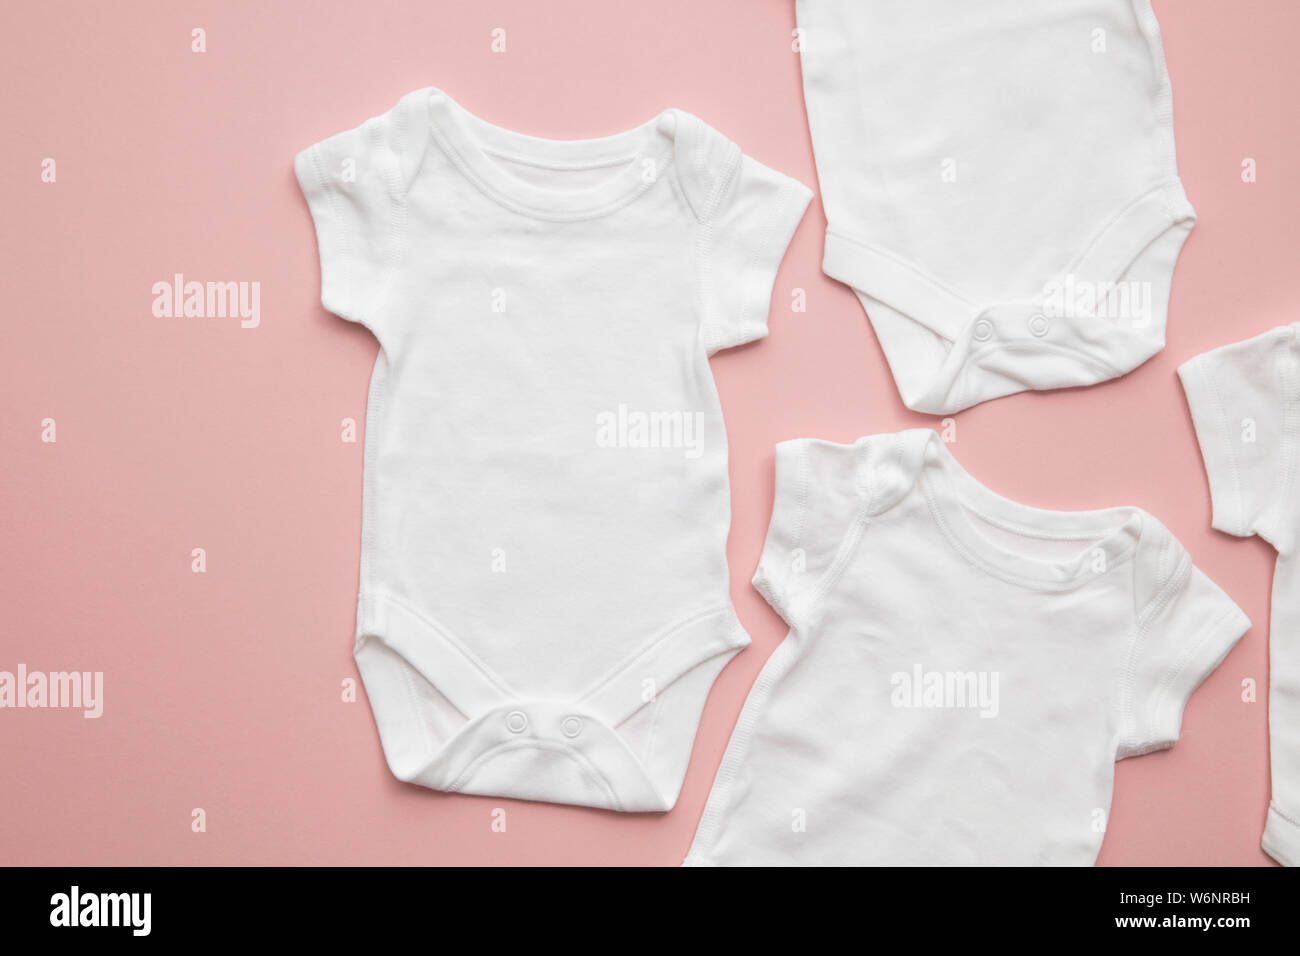 Cute baby white body suit layout on a pastel pink background Stock Photo